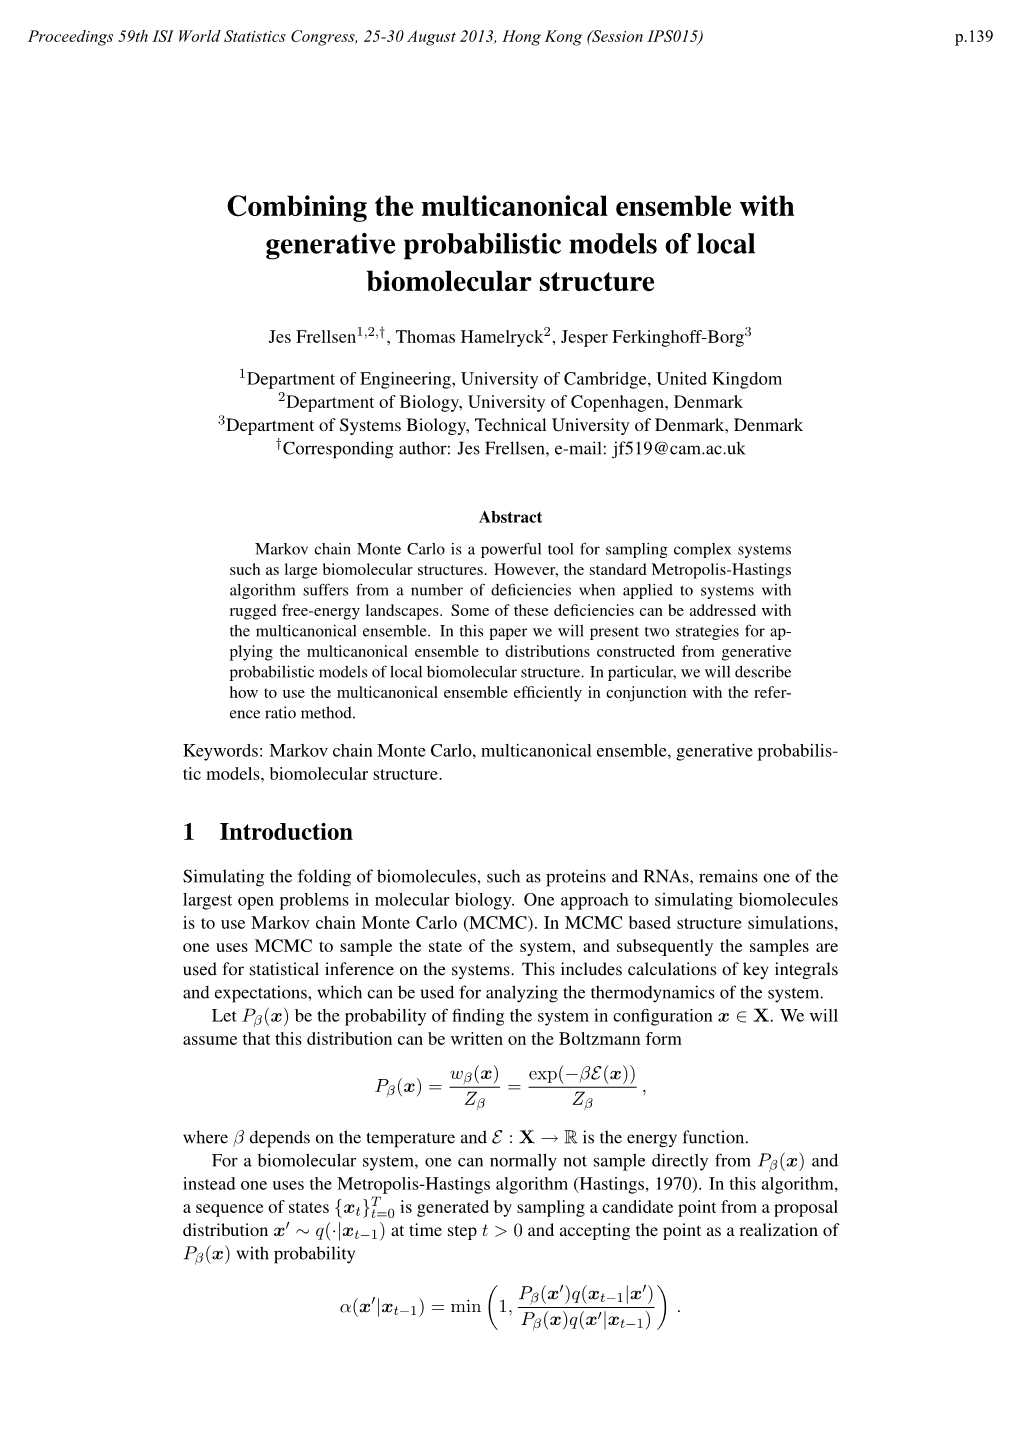 Combining the Multicanonical Ensemble with Generative Probabilistic Models of Local Biomolecular Structure